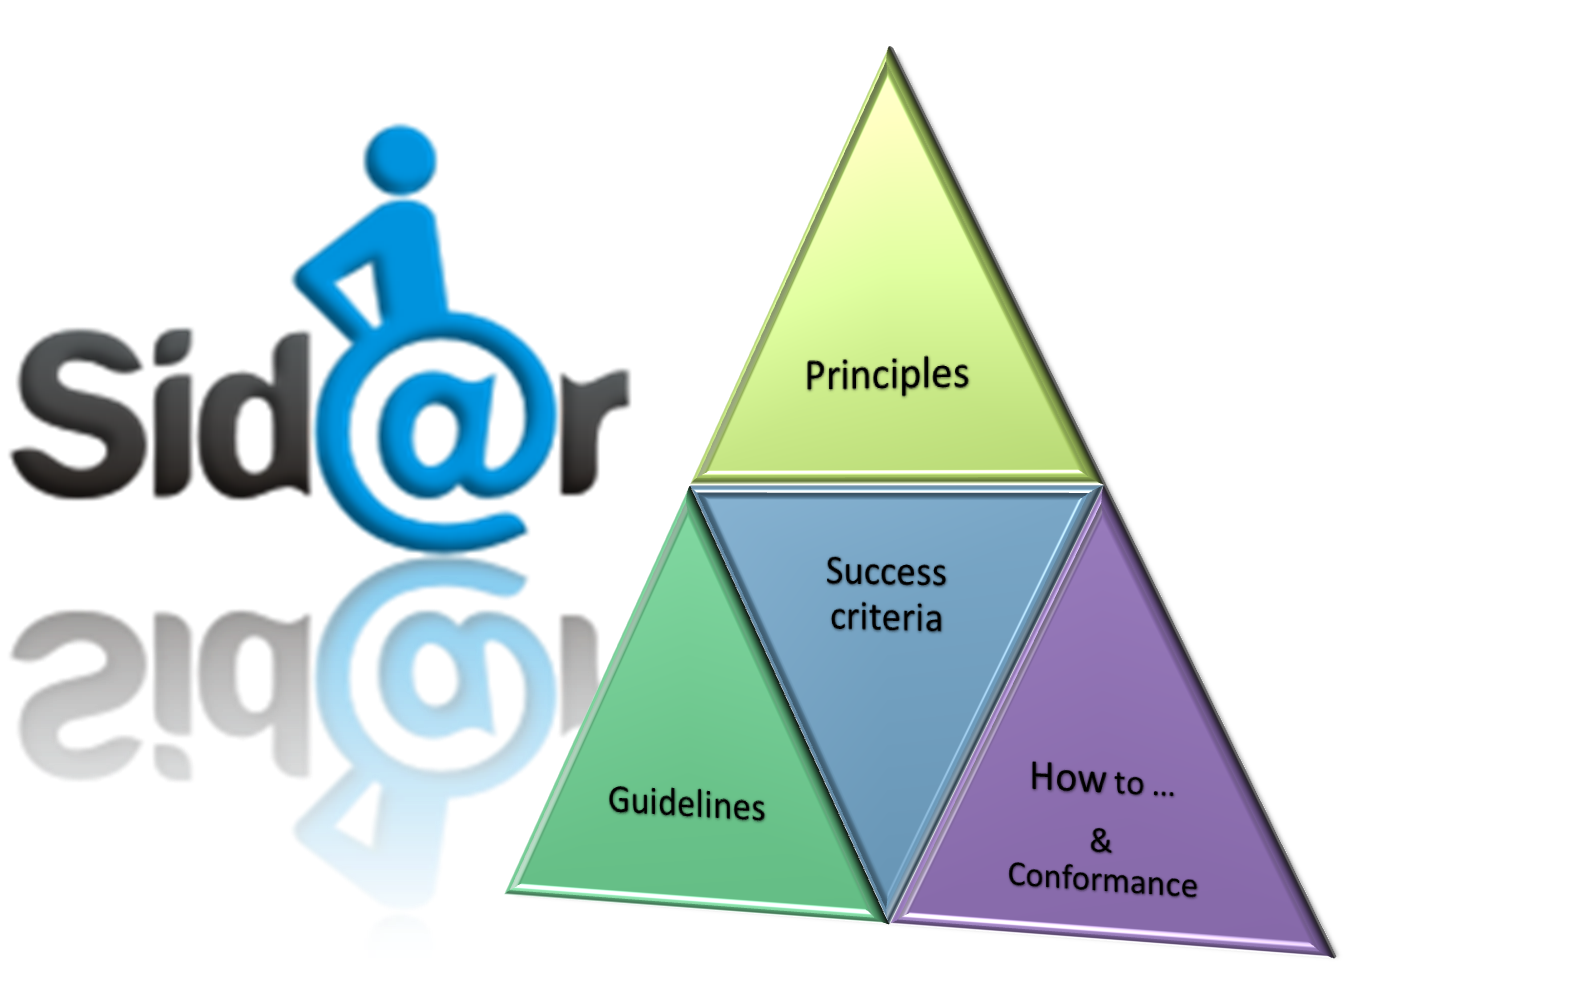 SIDAR logo and WCAG 2.0 documents structure (principles, guidelines, success criteria, how to and and conformance)